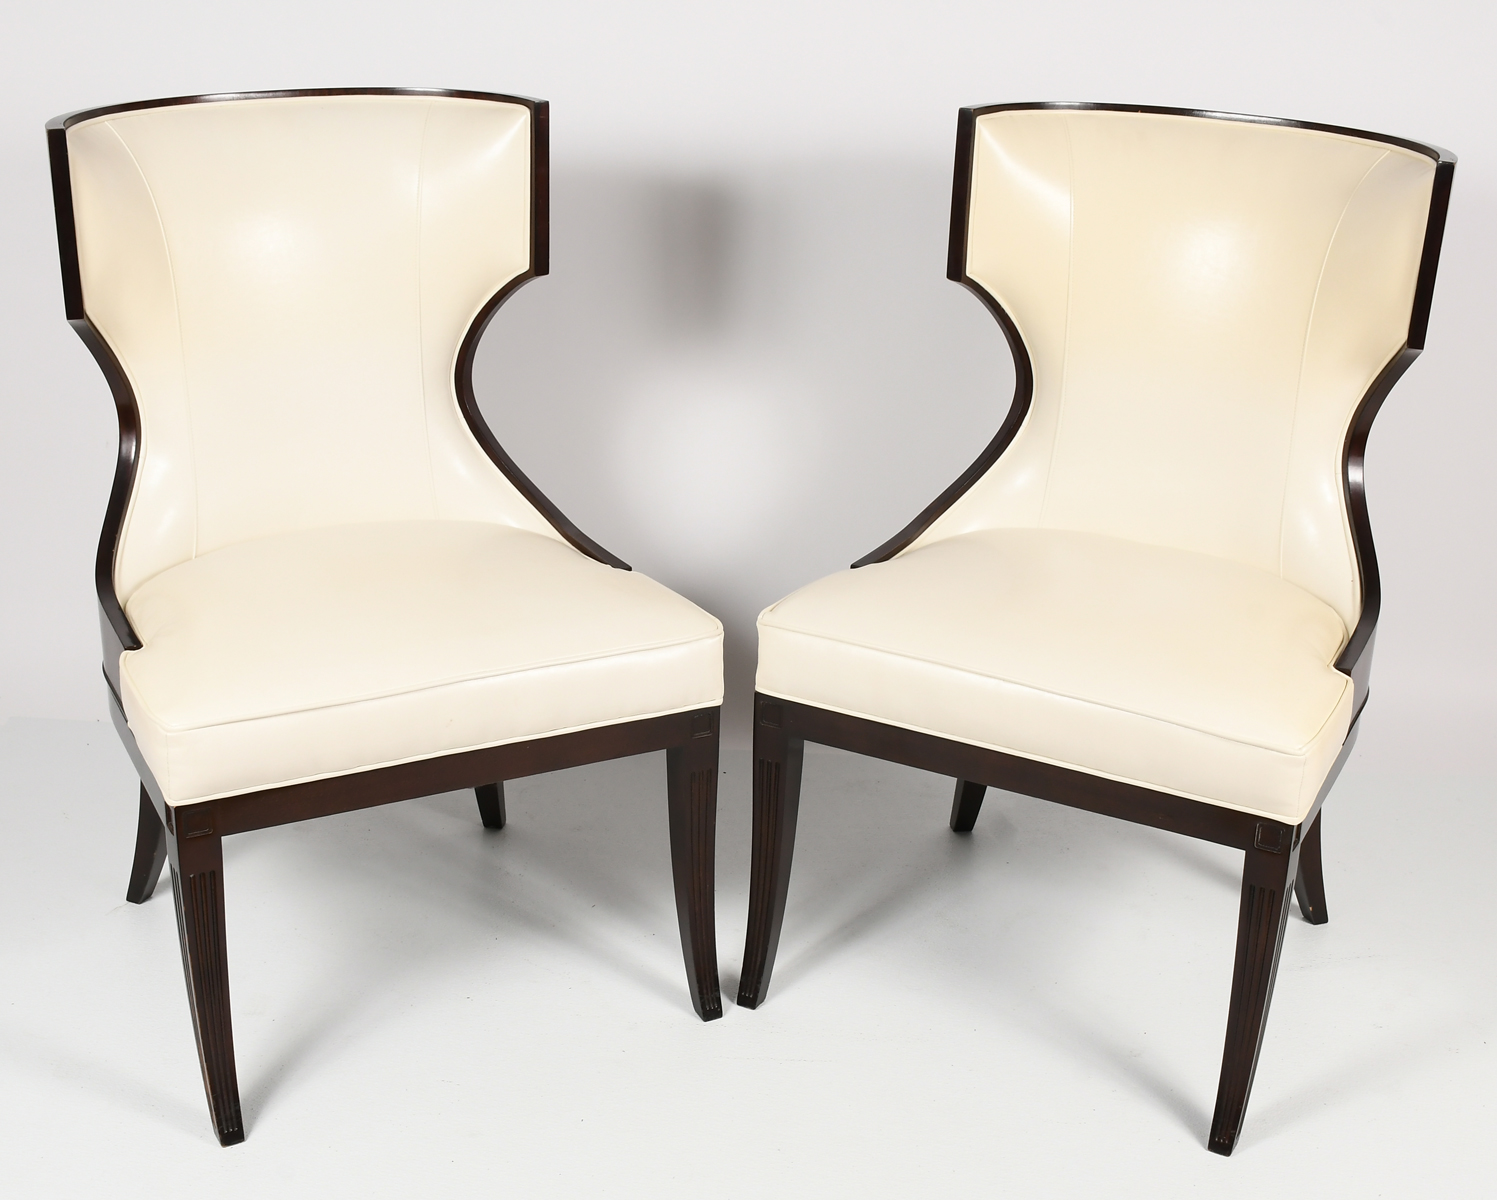 PAIR OF MODERN LEATHER WINGBACK 2ed27c